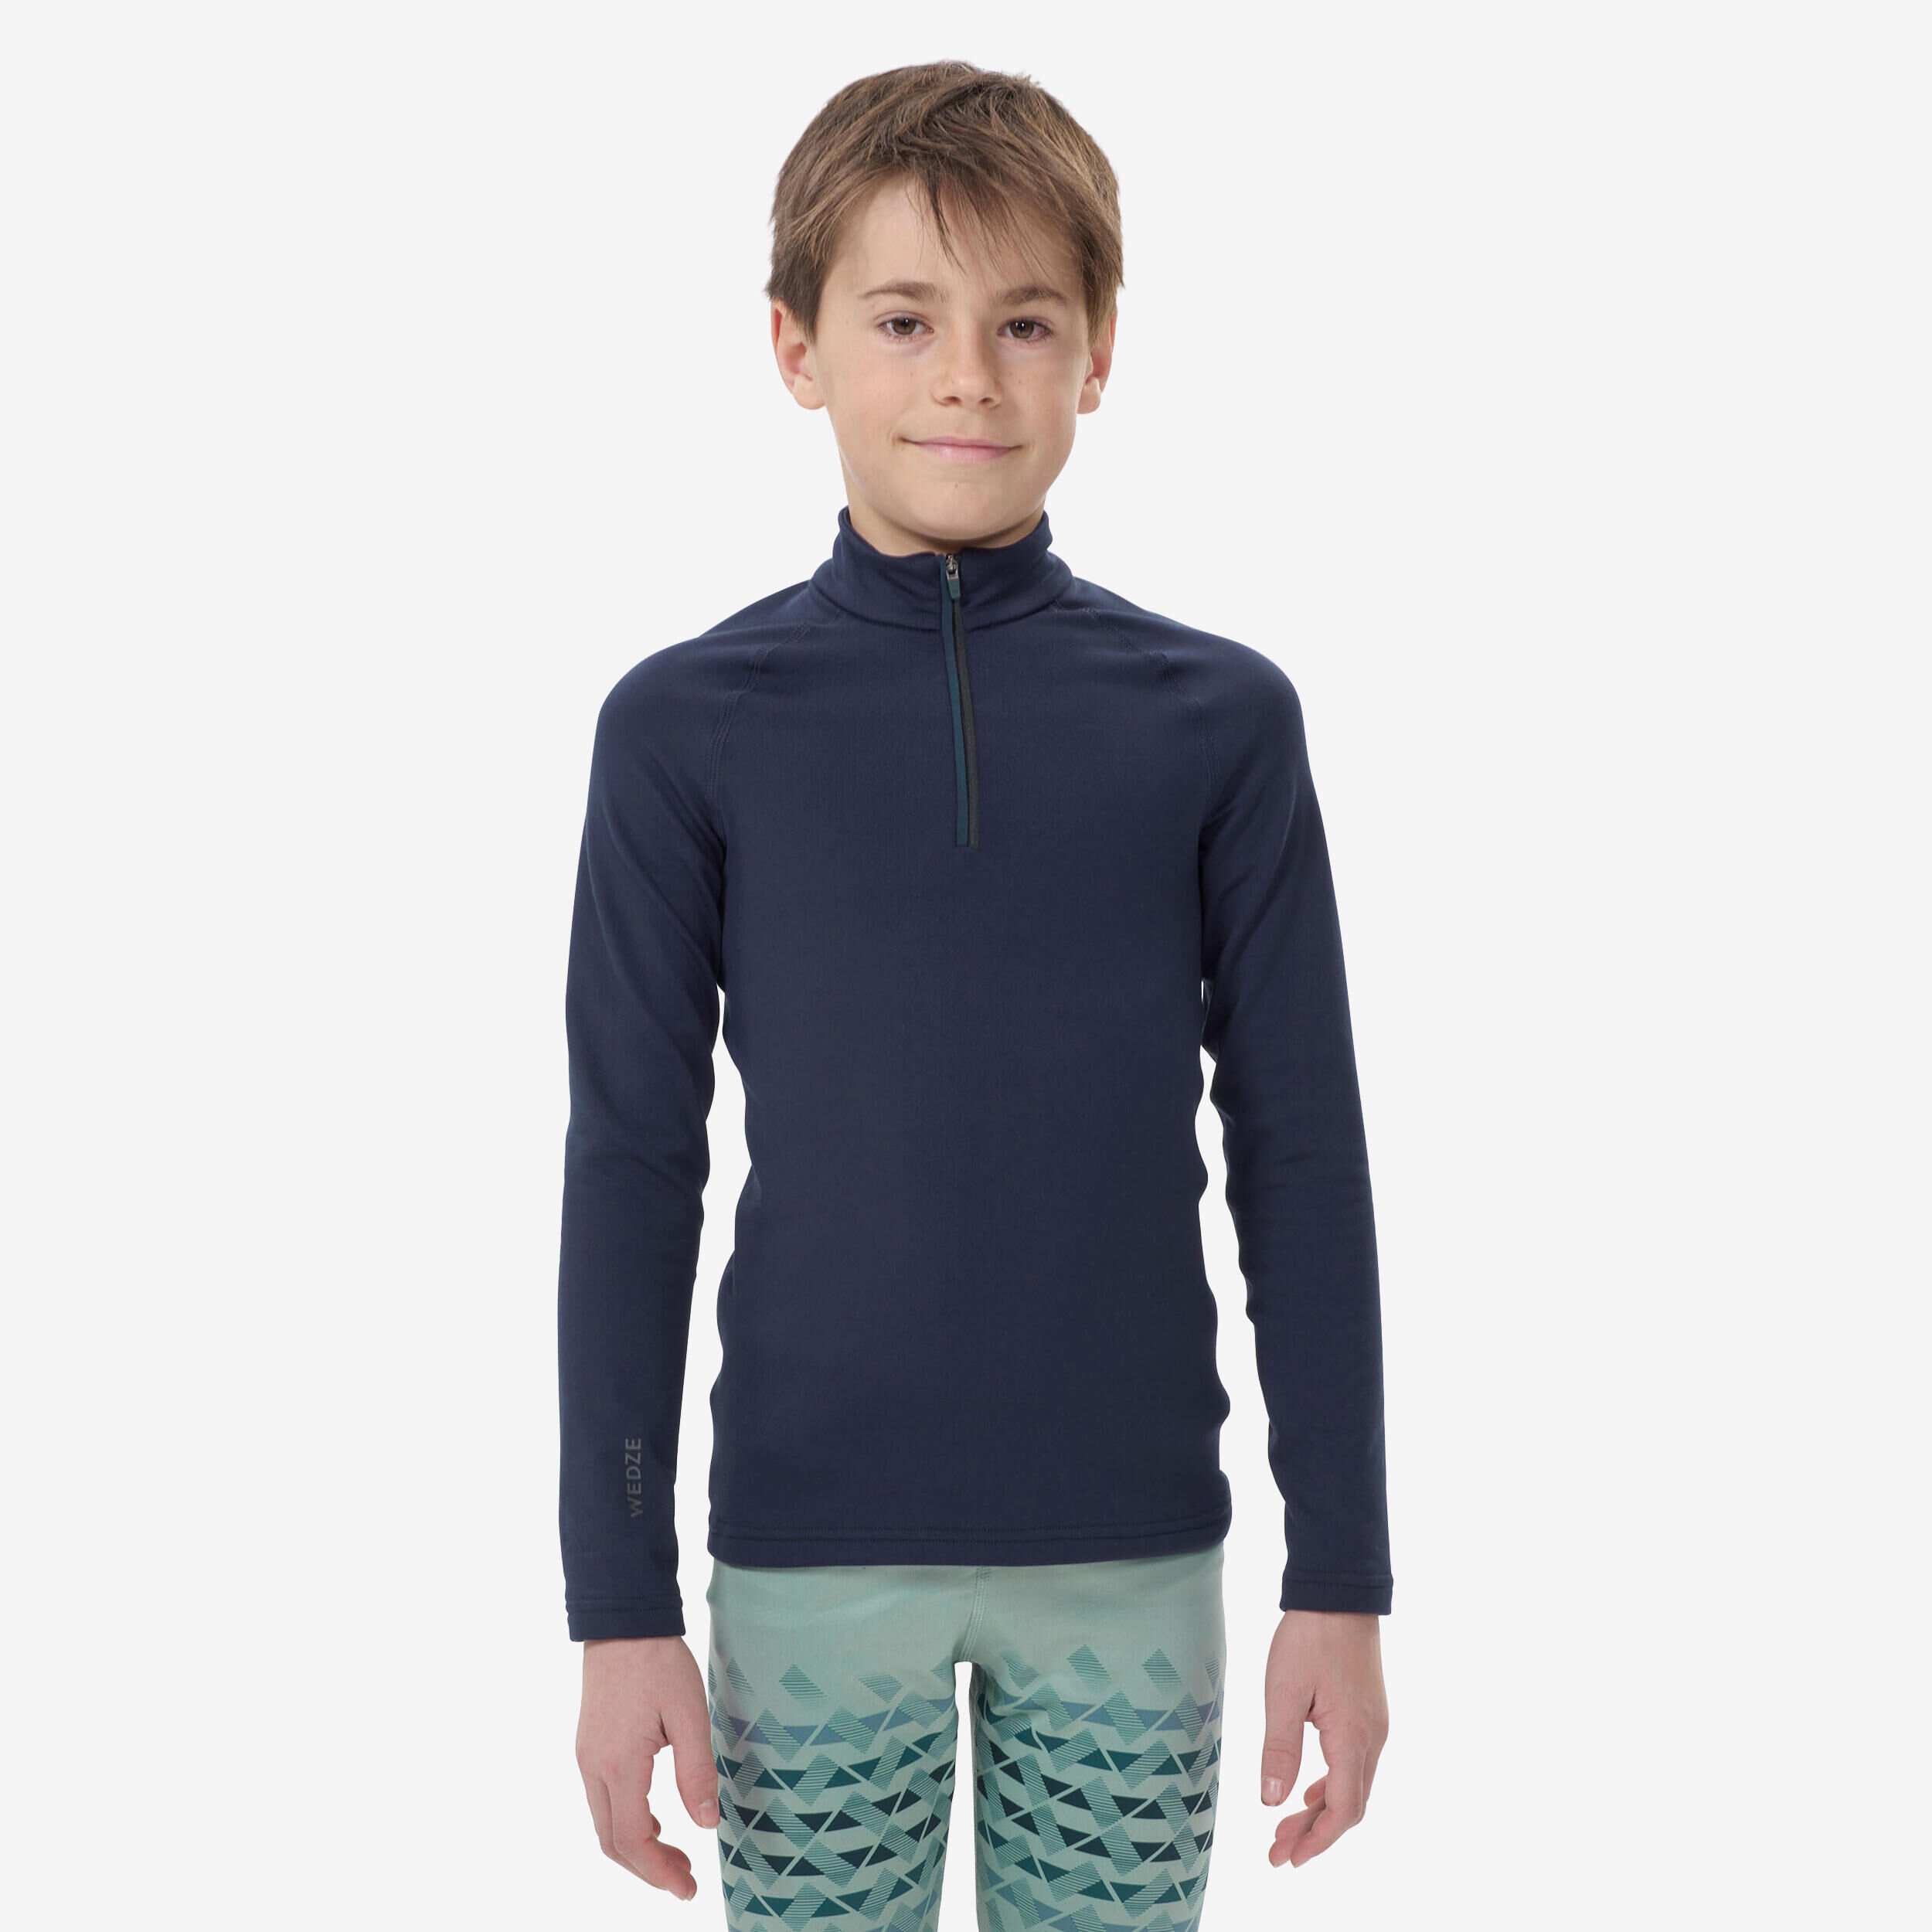 Roadbox Boys Thermal Underwear Sets - Ultra Soft FLeece Lined Long Johns  Base Layer Top and Bottoms with Pockets